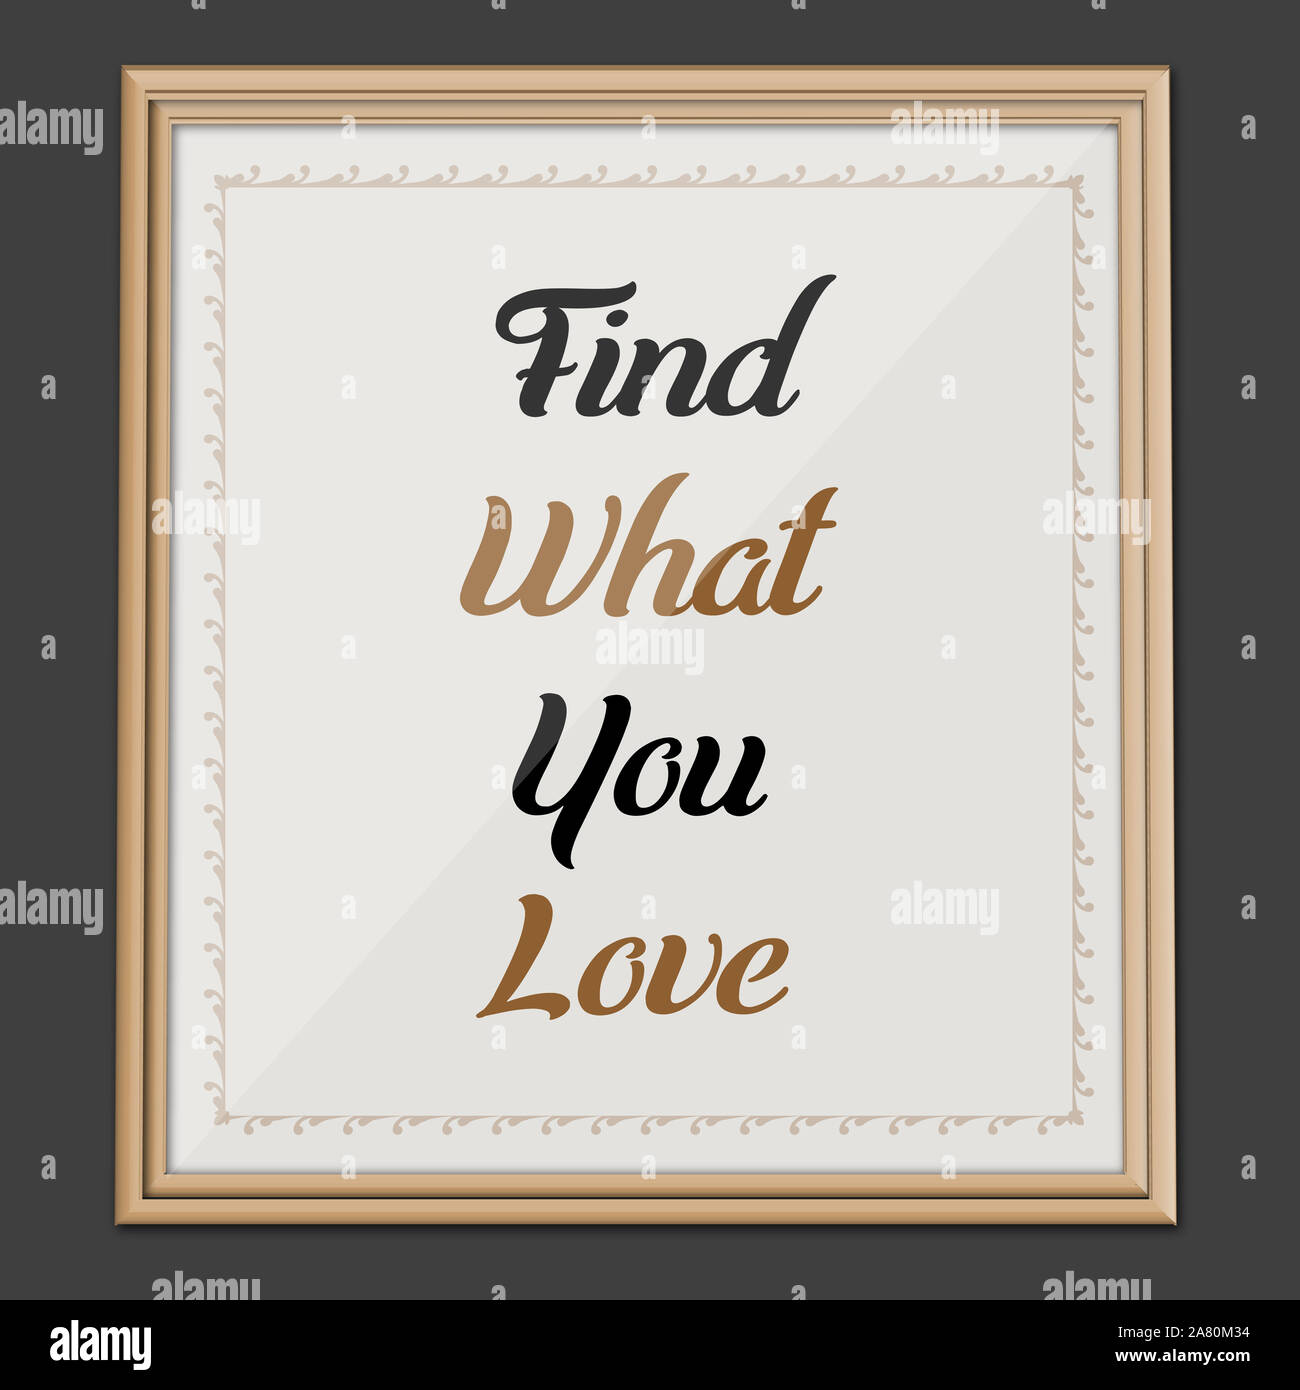 Find What You Love. Motivation and Inspirational Quote Wall art Poster Stock Photo